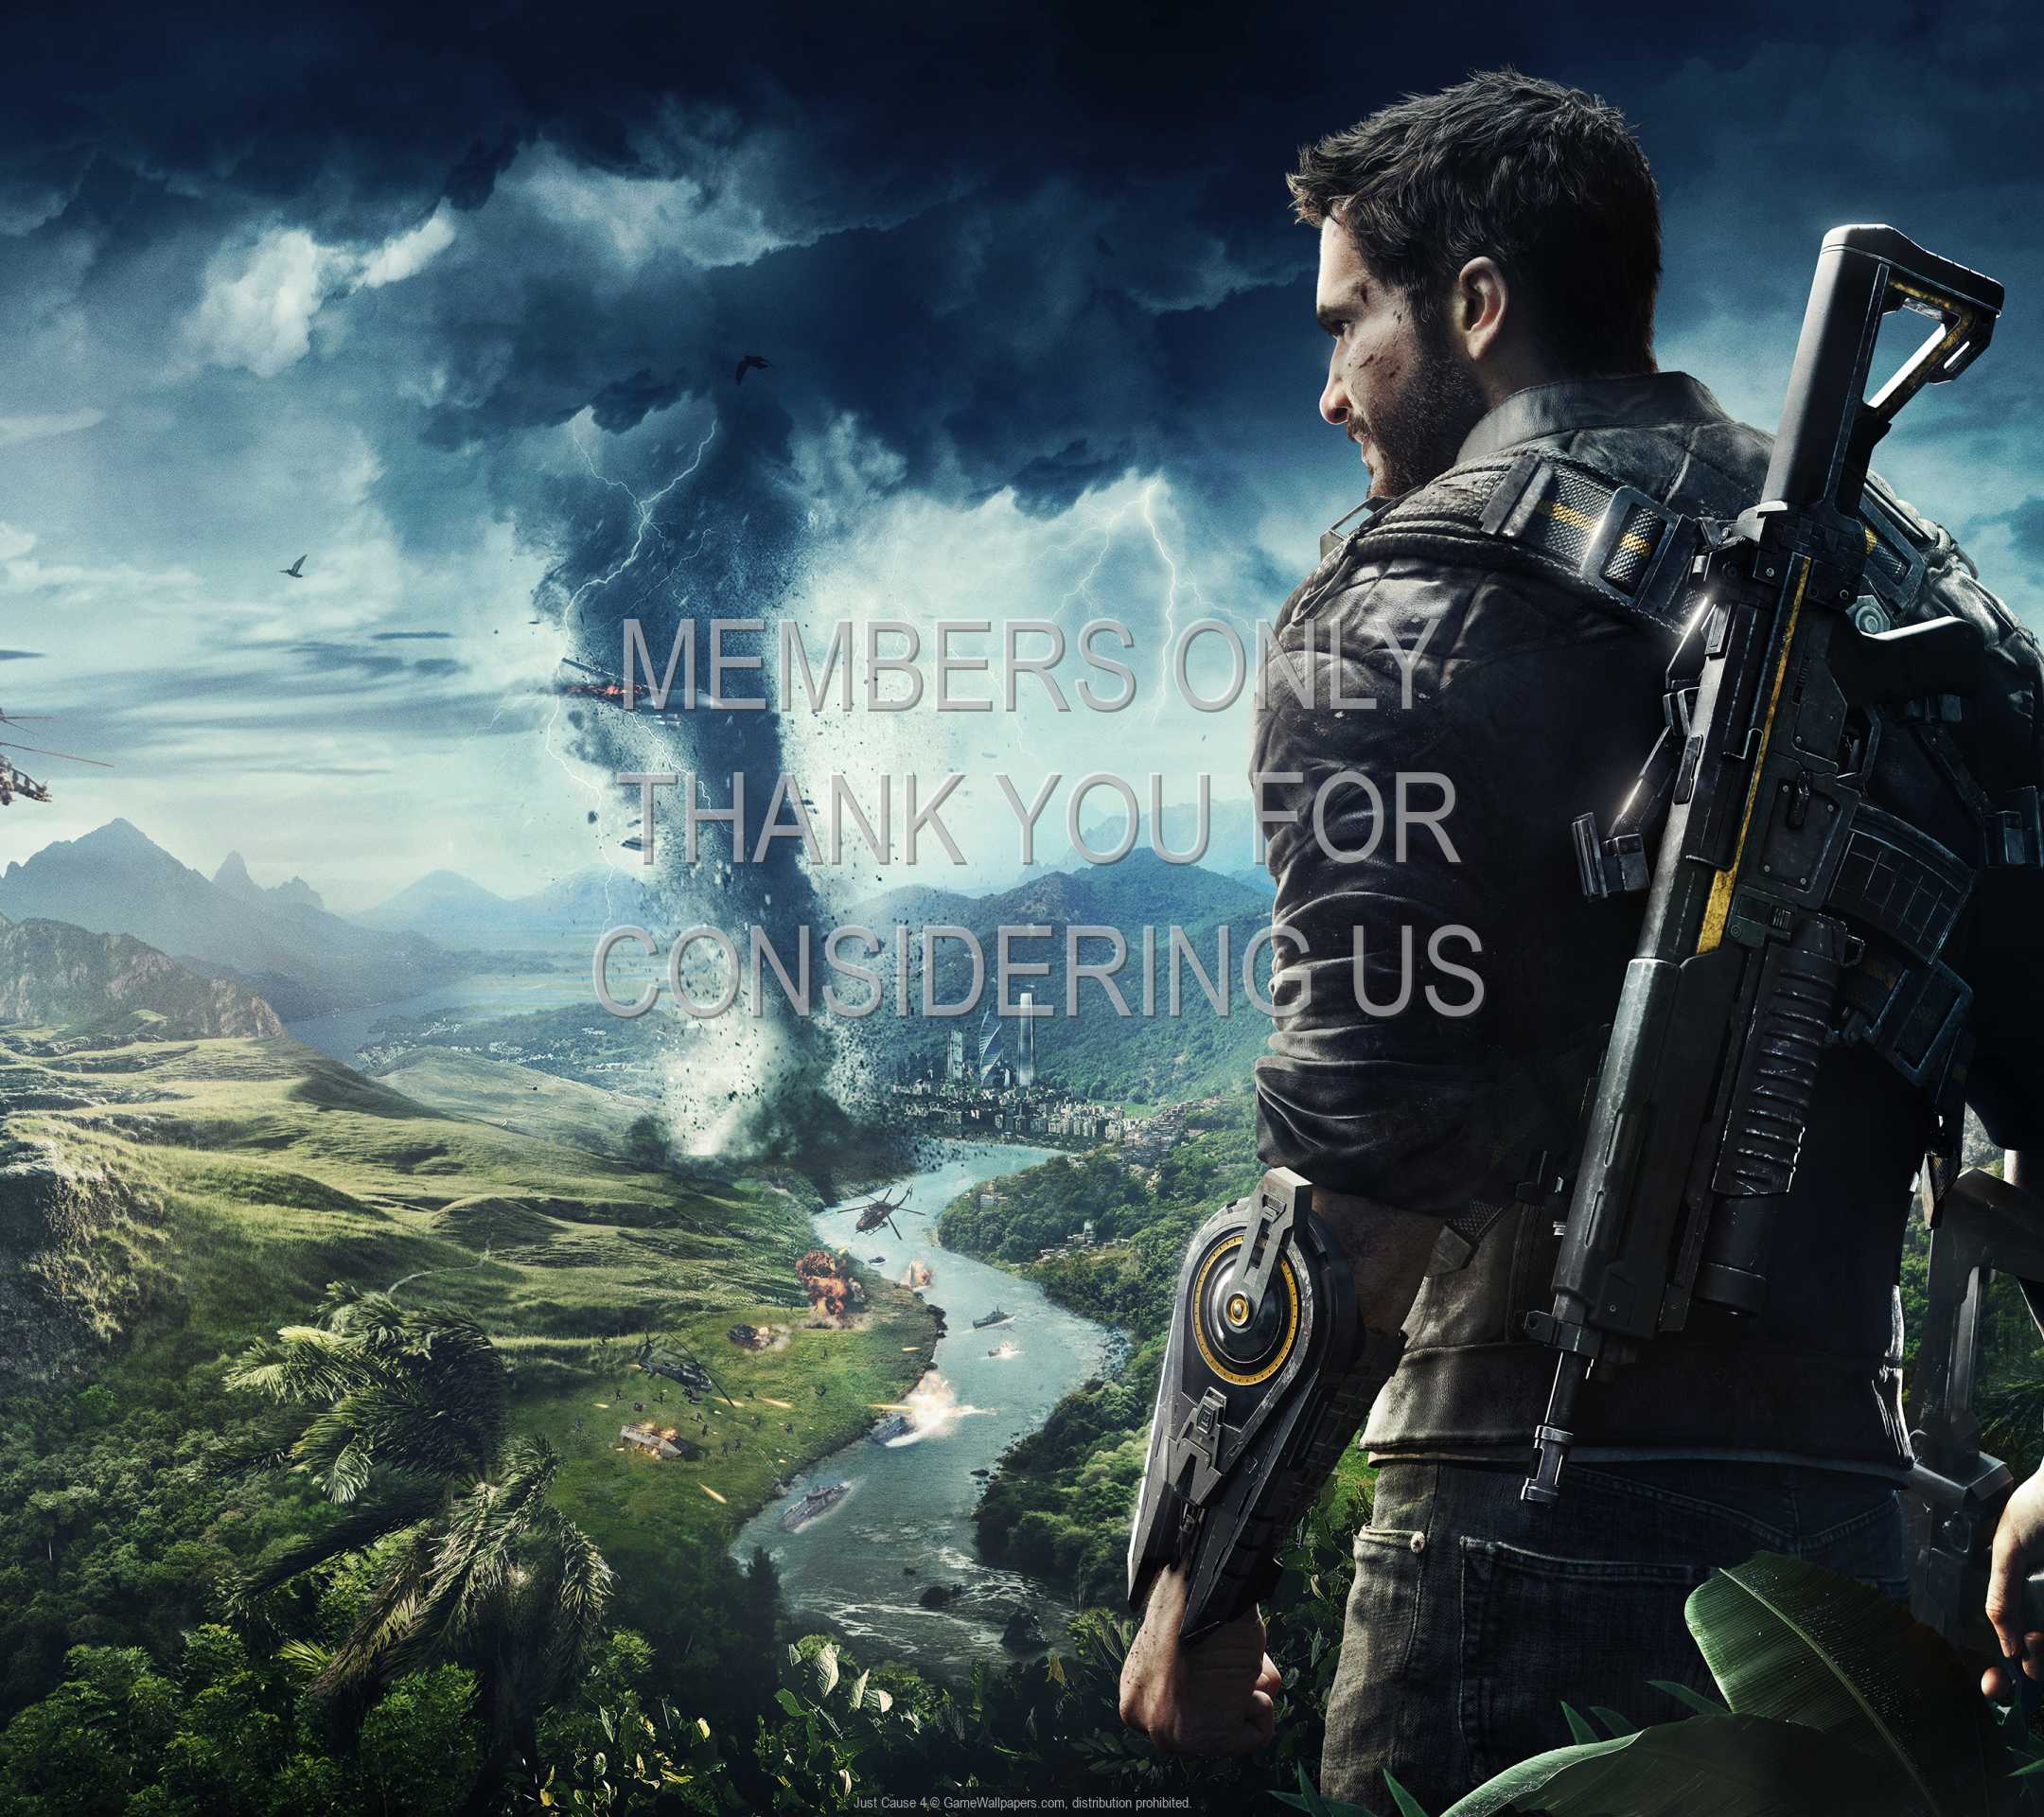 Just Cause 4 1080p Horizontal Mobile wallpaper or background 02